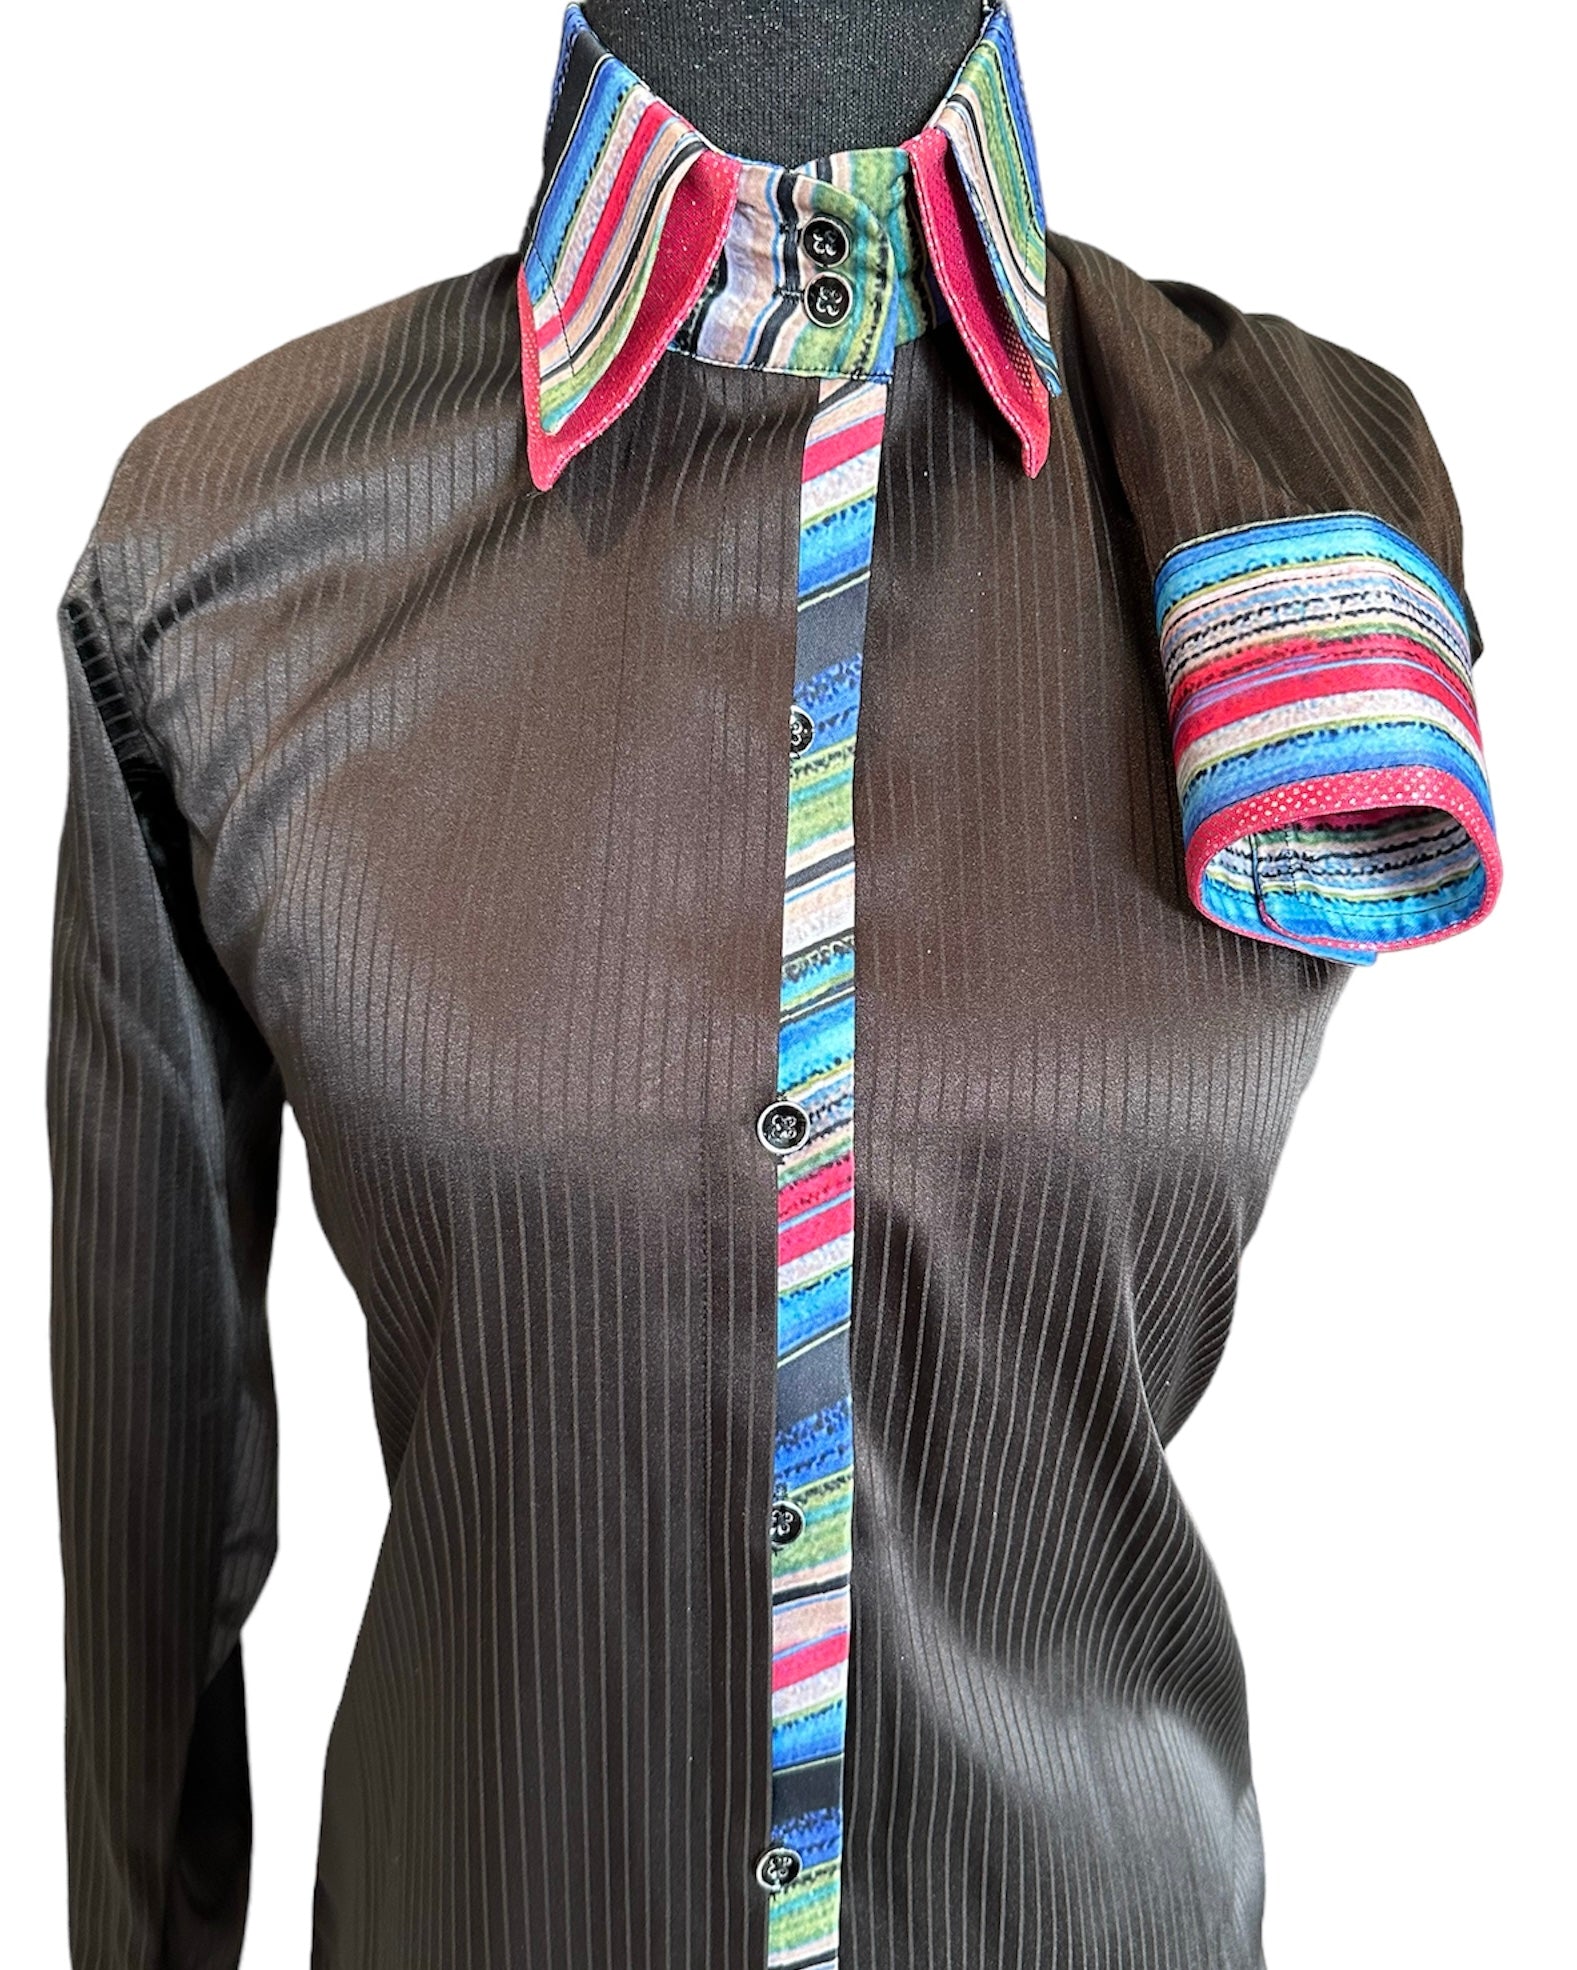 Western button Up Black tonal stripe with bright accents